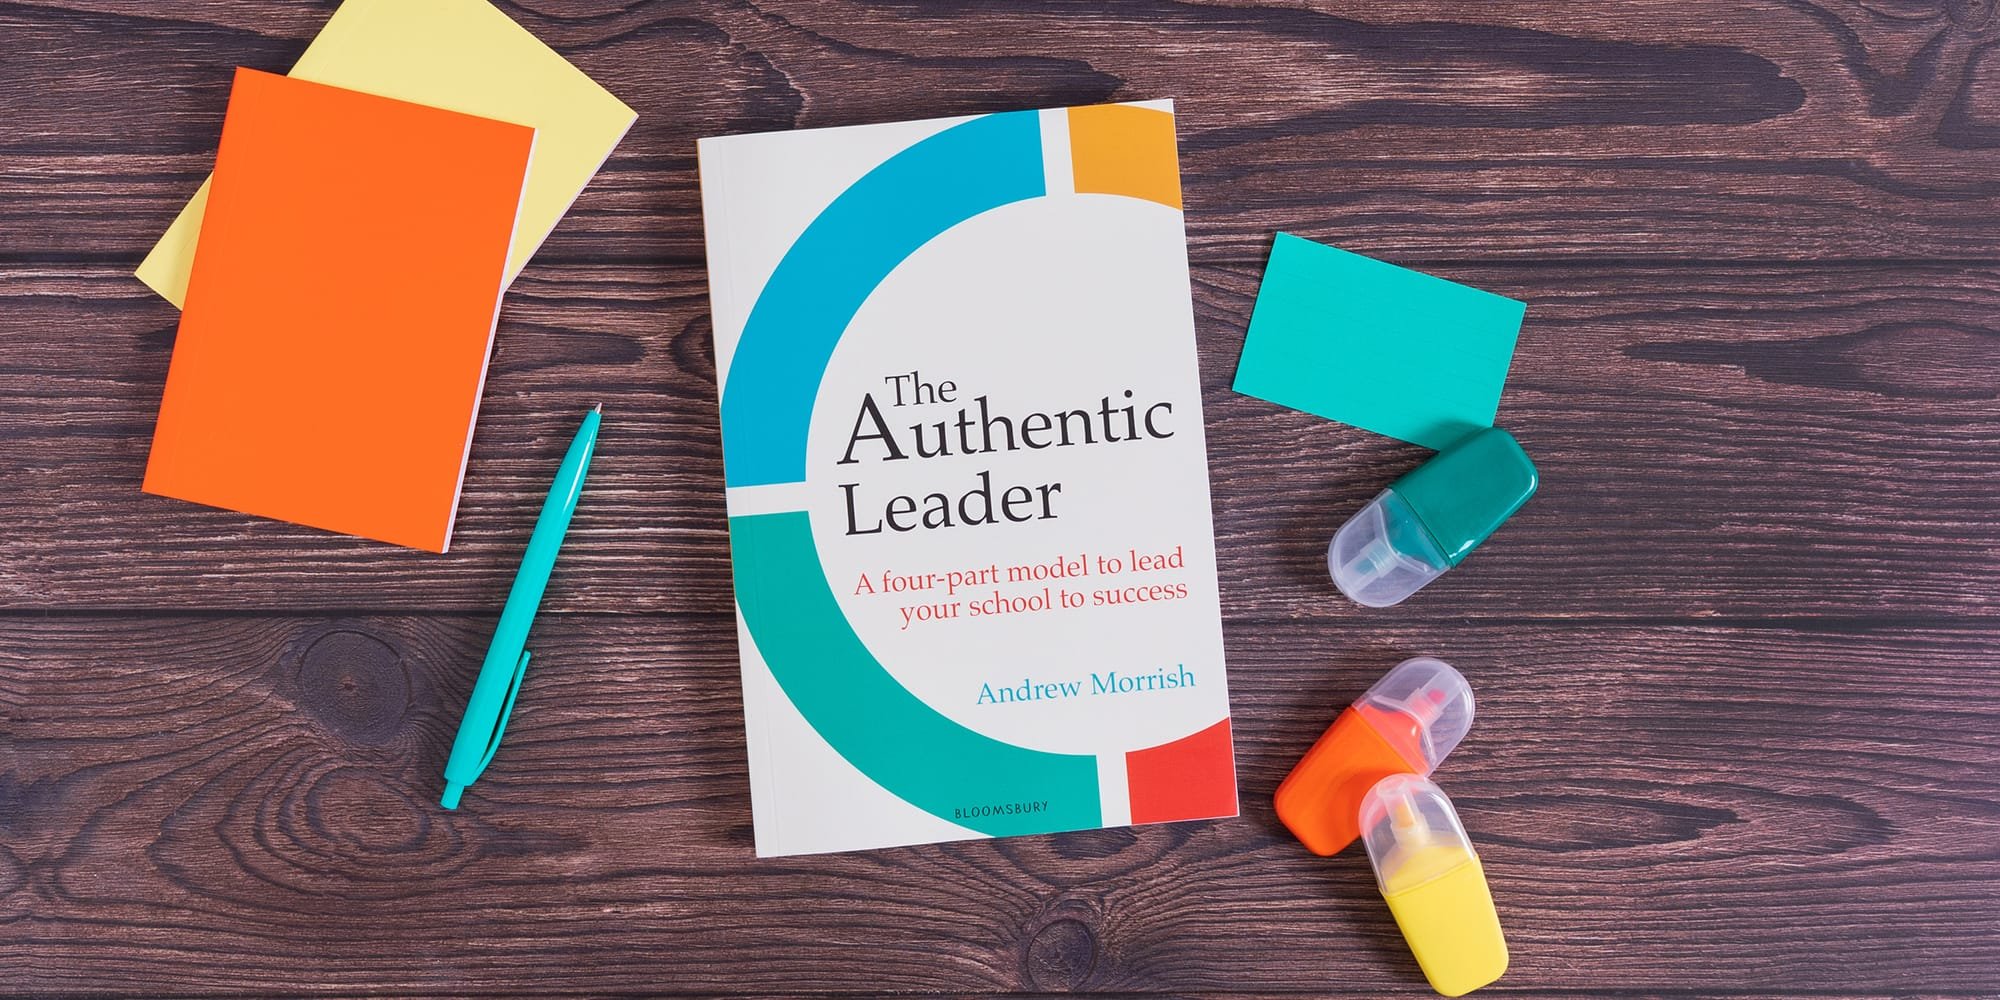 NEW BOOK! The Authentic Leader. Out now.